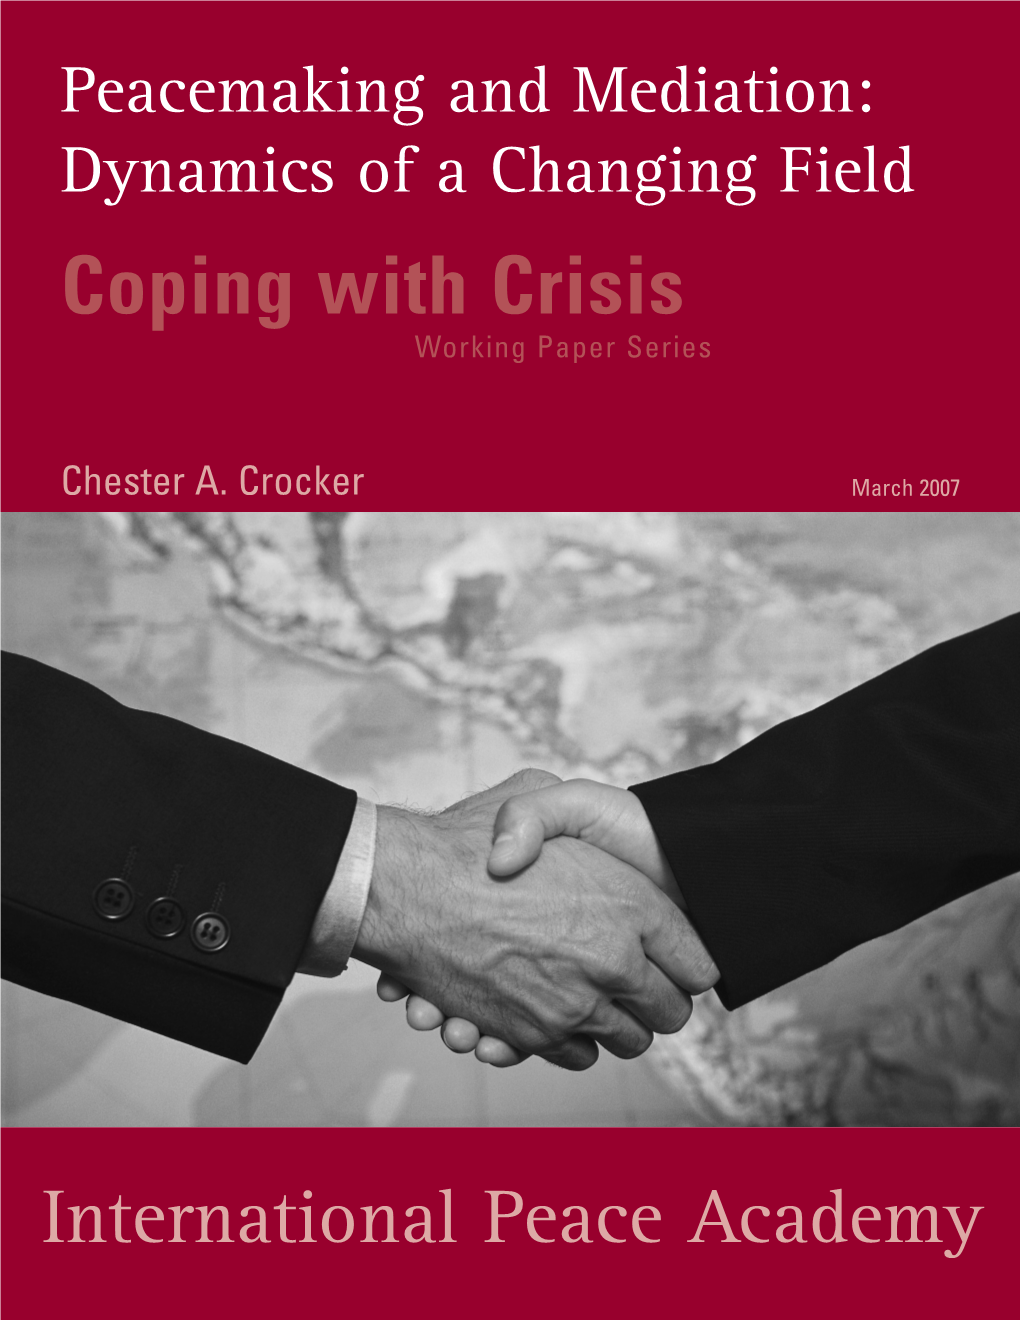 Peacemaking and Mediation: Dynamics of a Changing Field Coping with Crisis Working Paper Series